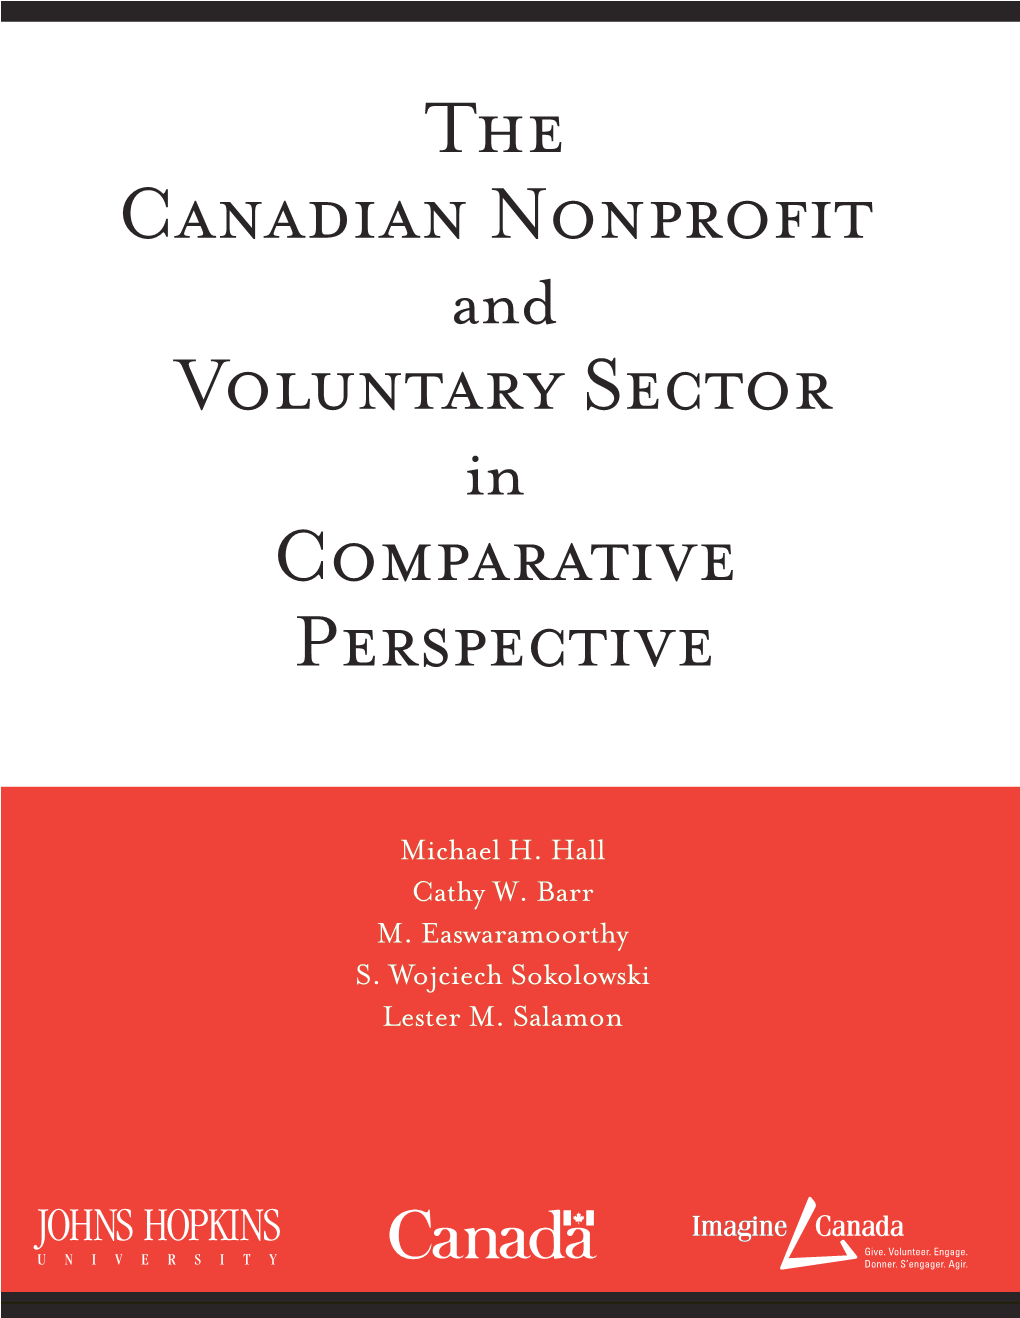 The Canadian Nonprofit and Voluntary Sector in Comparative Perspective